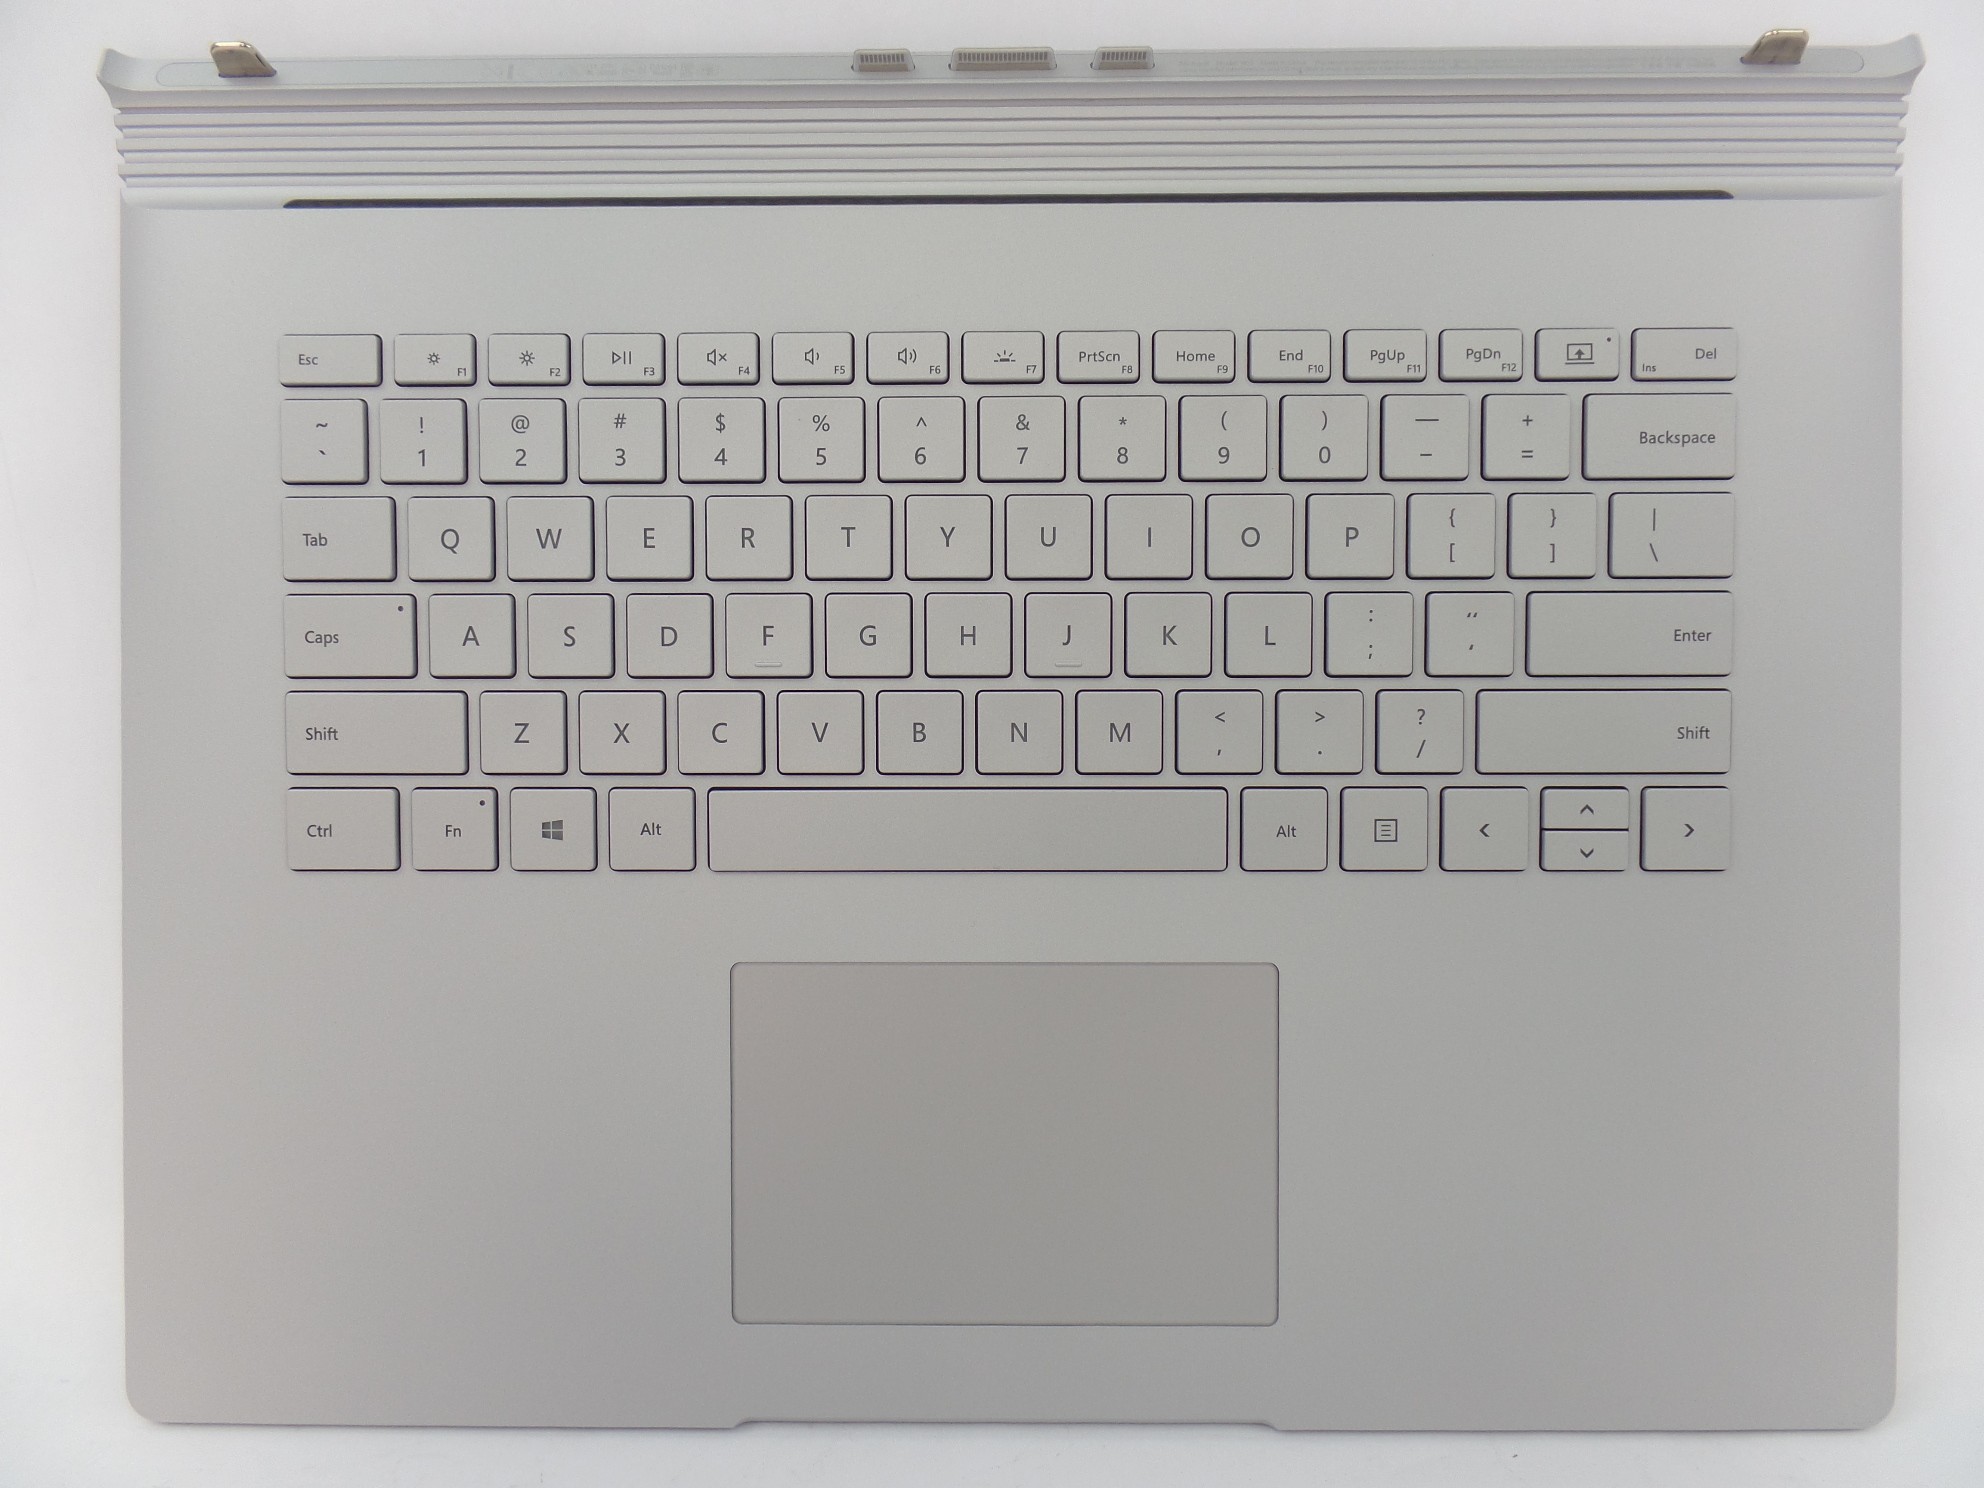 Read: Defective Surface book 2 15" Performance Base Keyboard 1813 with GTX 1060